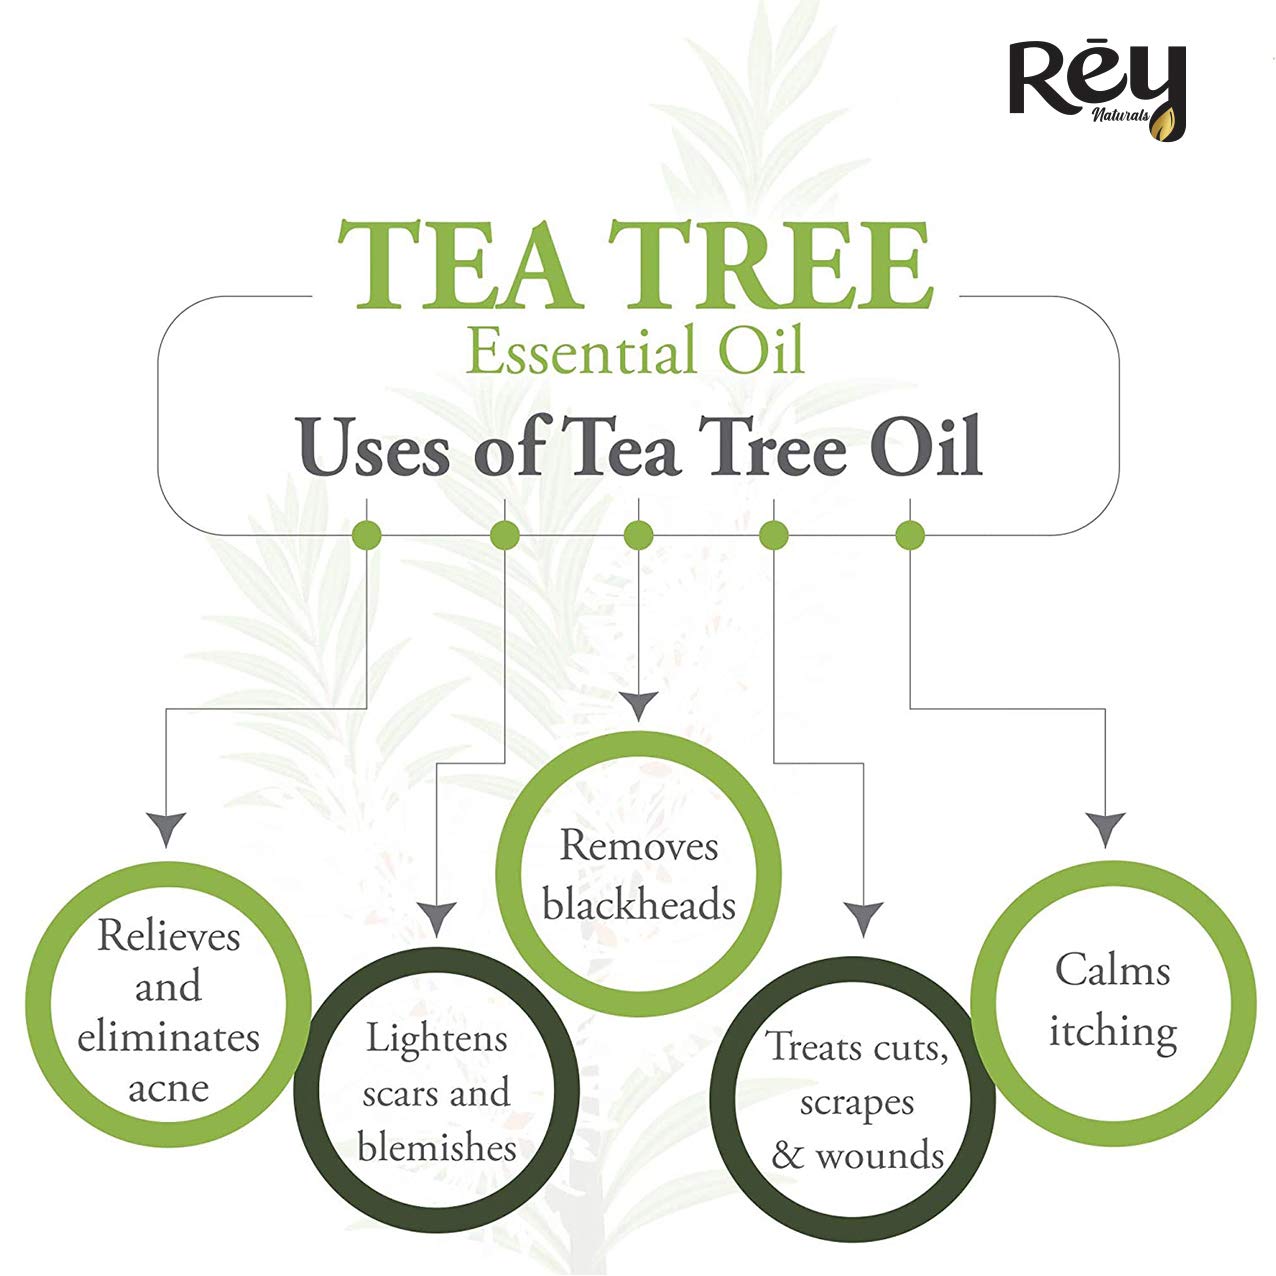 Rey Naturals Tea tree oil for Aromatherapy - Tea Tree Essential Oil for Healthy Skin, Face, and Hair - 100% Organic Remedy for Dandruff, Acne - 30 ml (15 ml x 2) super saver combo